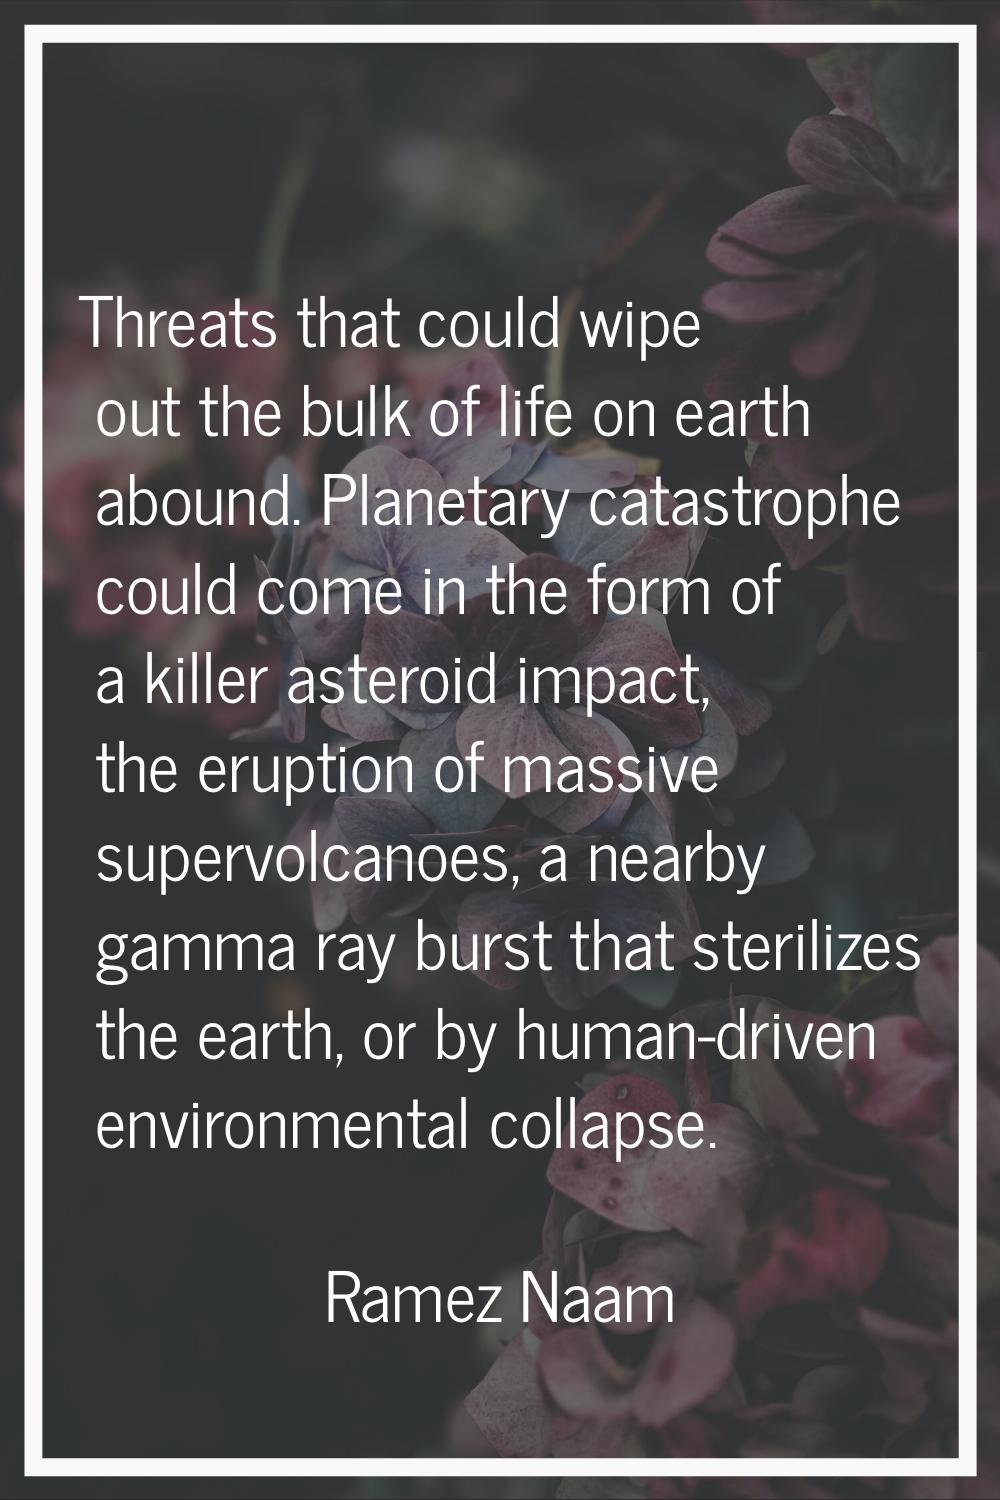 Threats that could wipe out the bulk of life on earth abound. Planetary catastrophe could come in t